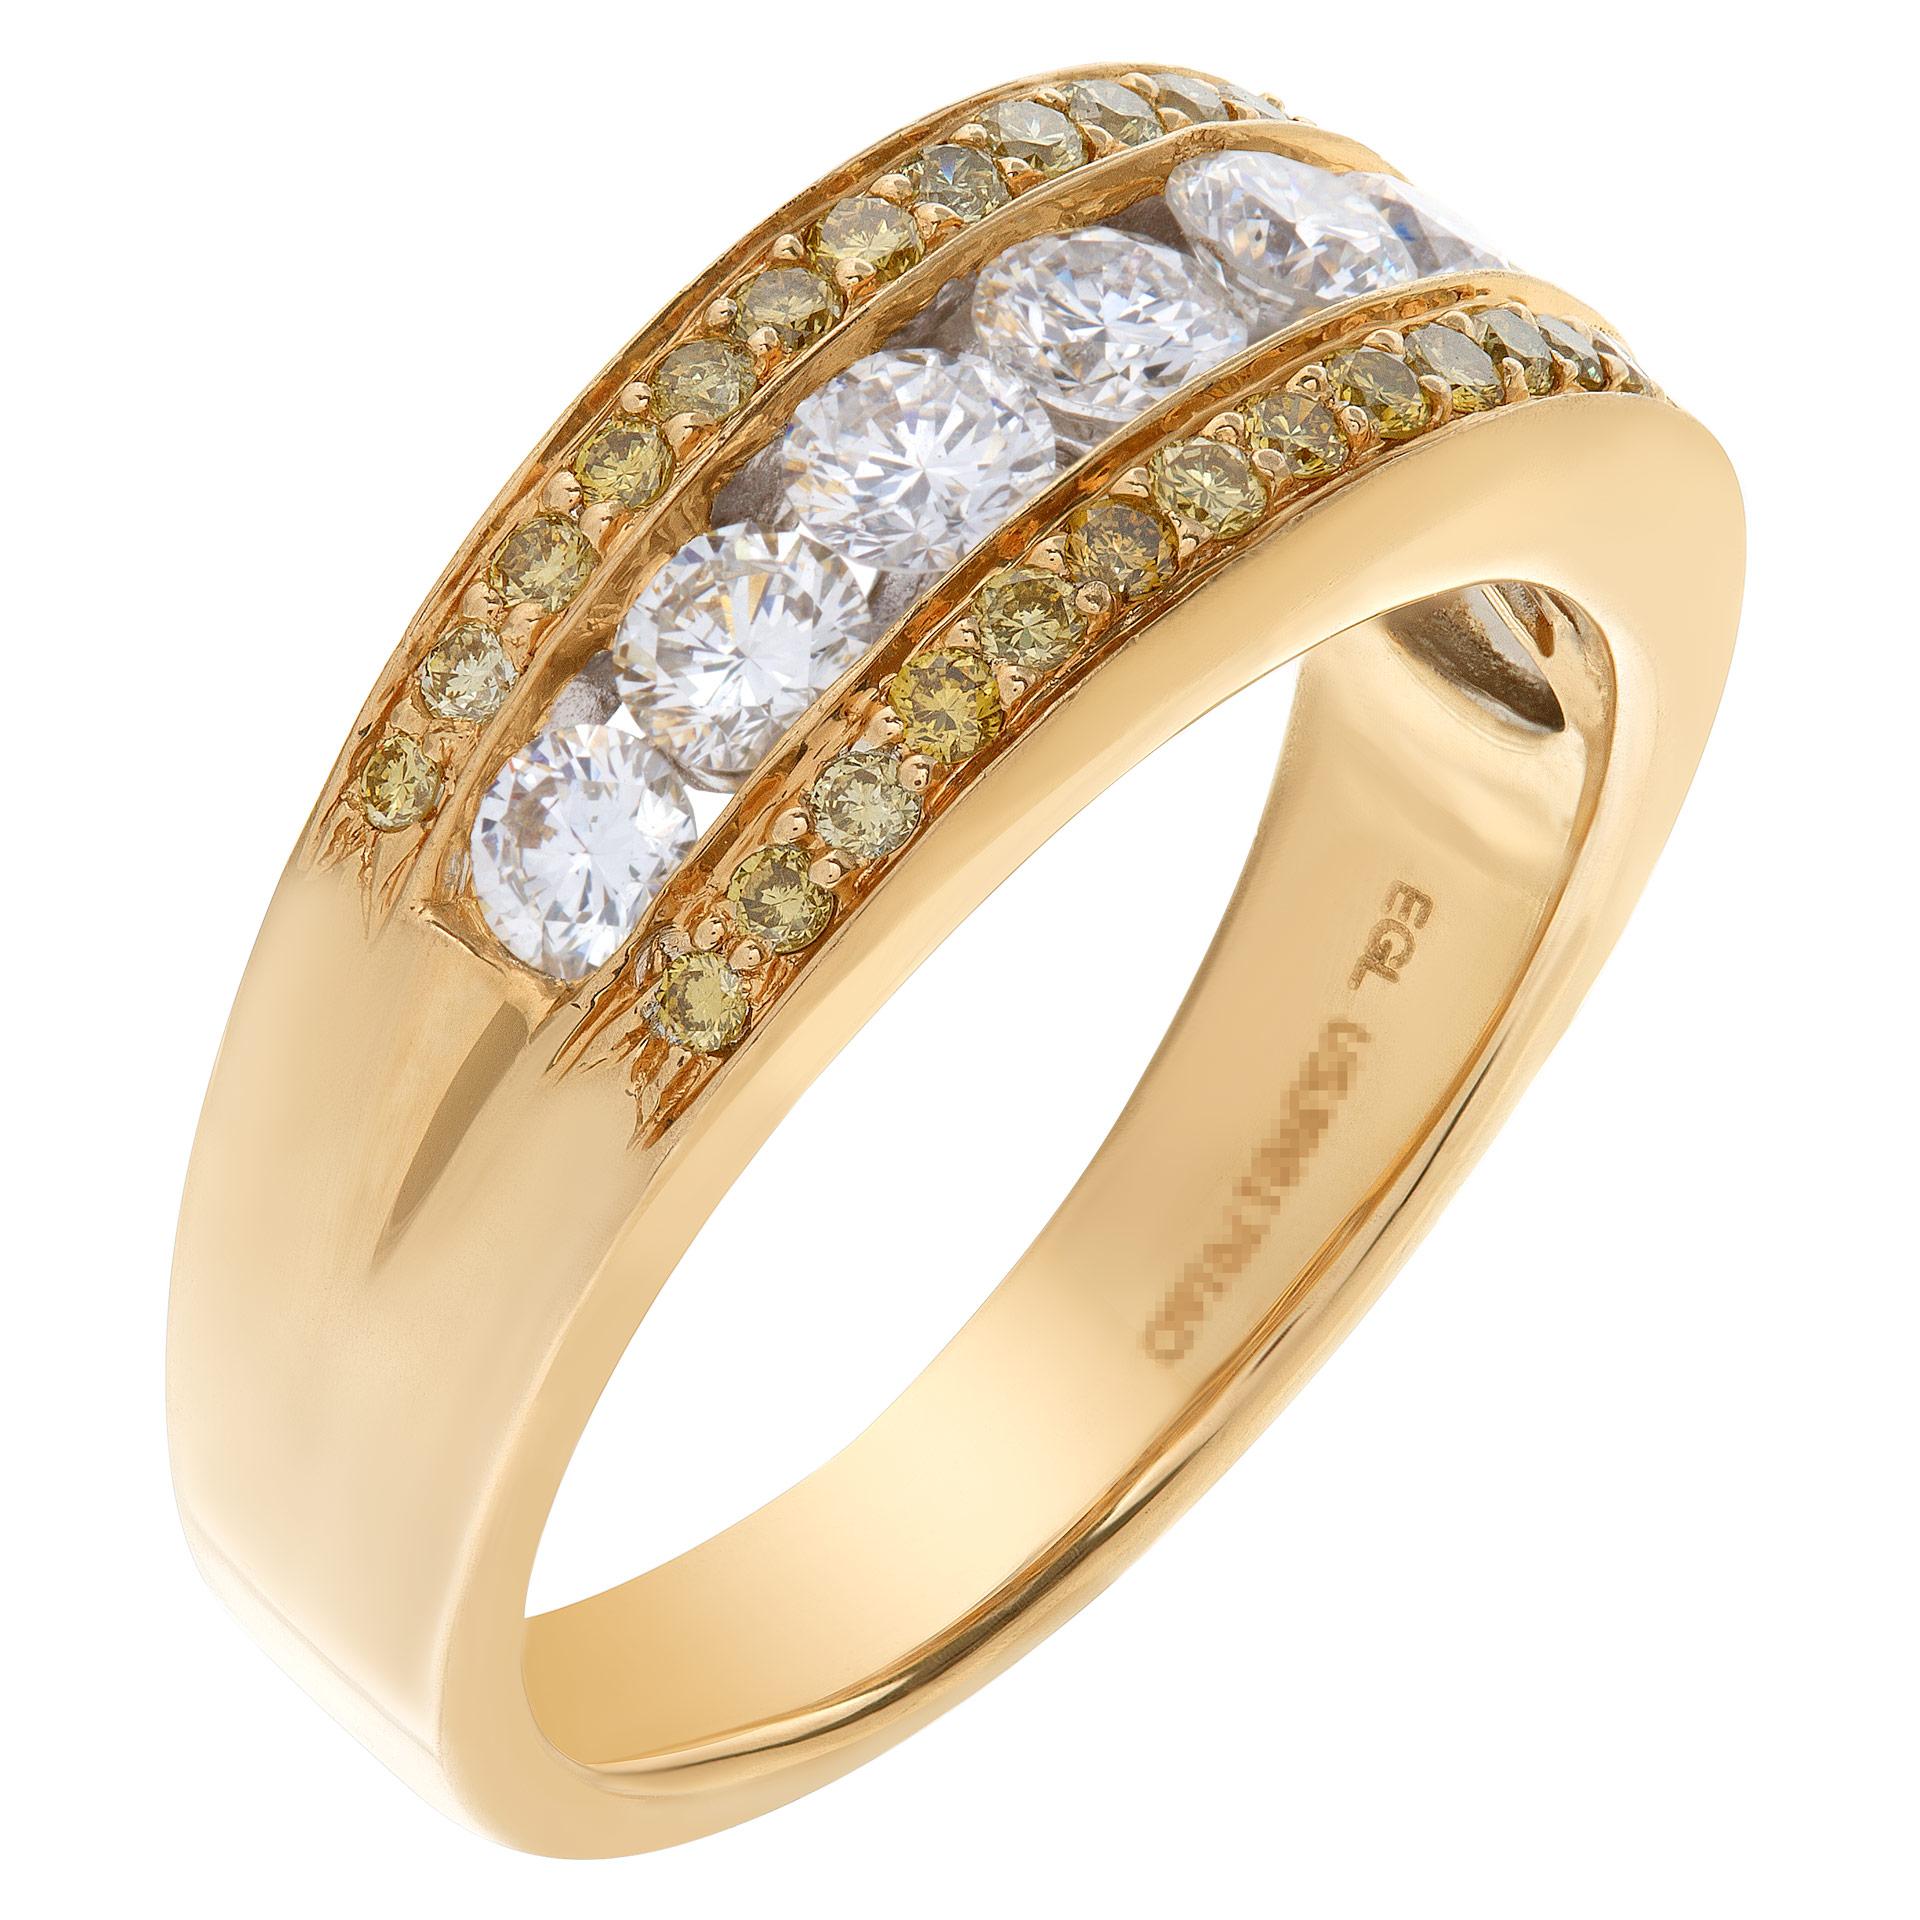 Exquisite diamond band ring with 7 full cut round brilliant diamonds set in 14K yellow gold, enhanced by irridiated yellow diamonds border on each side. Diamonds total approximately 1 carat, estimate G-H color, VS clarity. Size 7. Width at head: